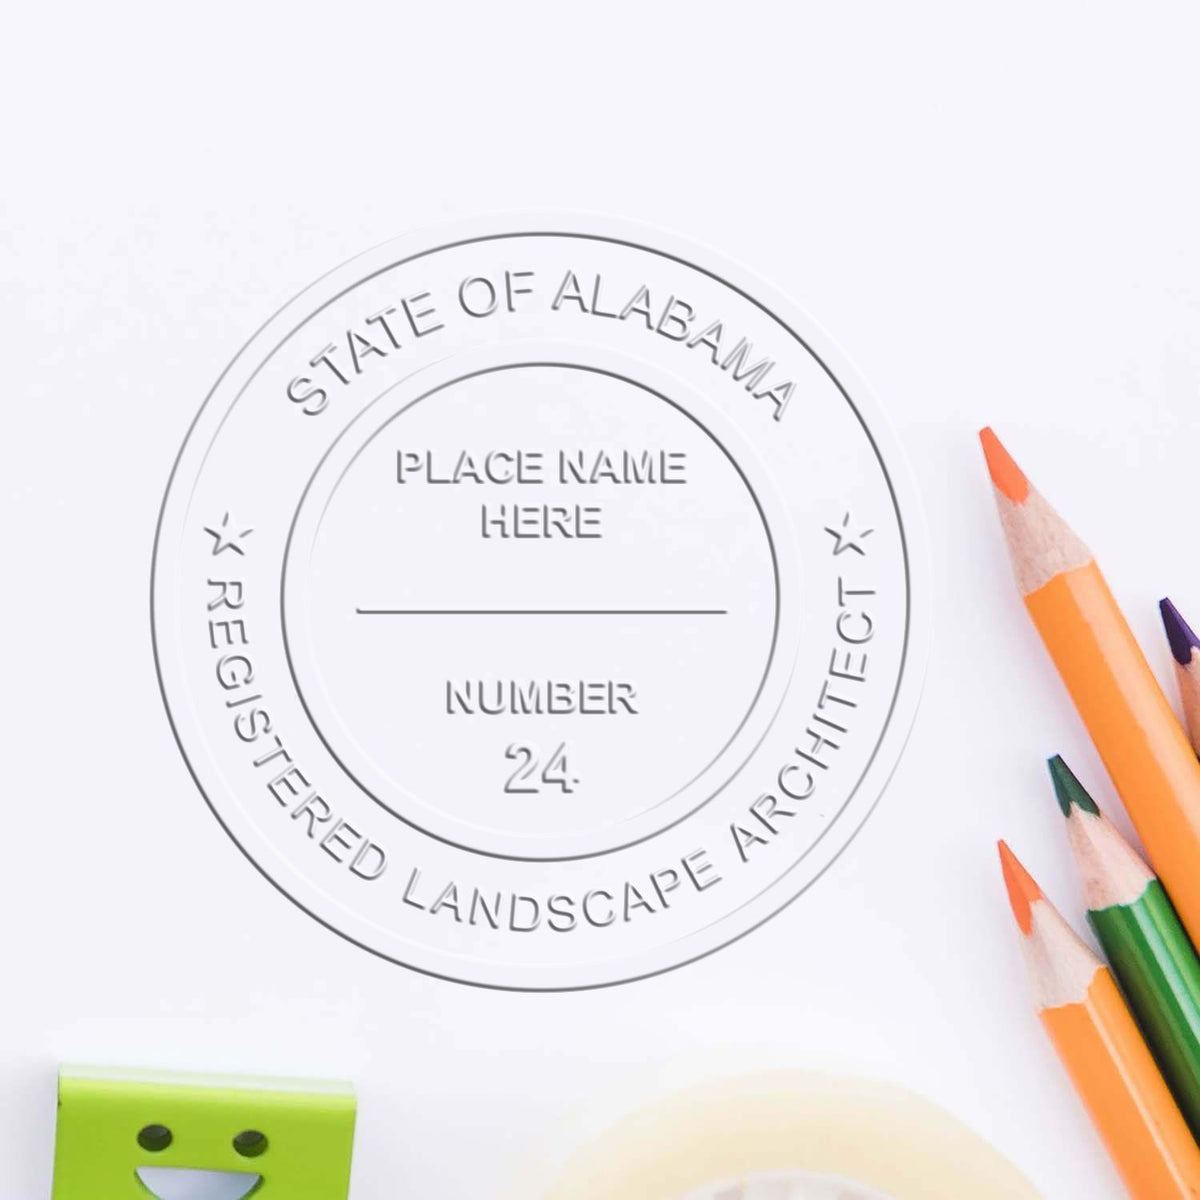 An in use photo of the Hybrid Alabama Landscape Architect Seal showing a sample imprint on a cardstock